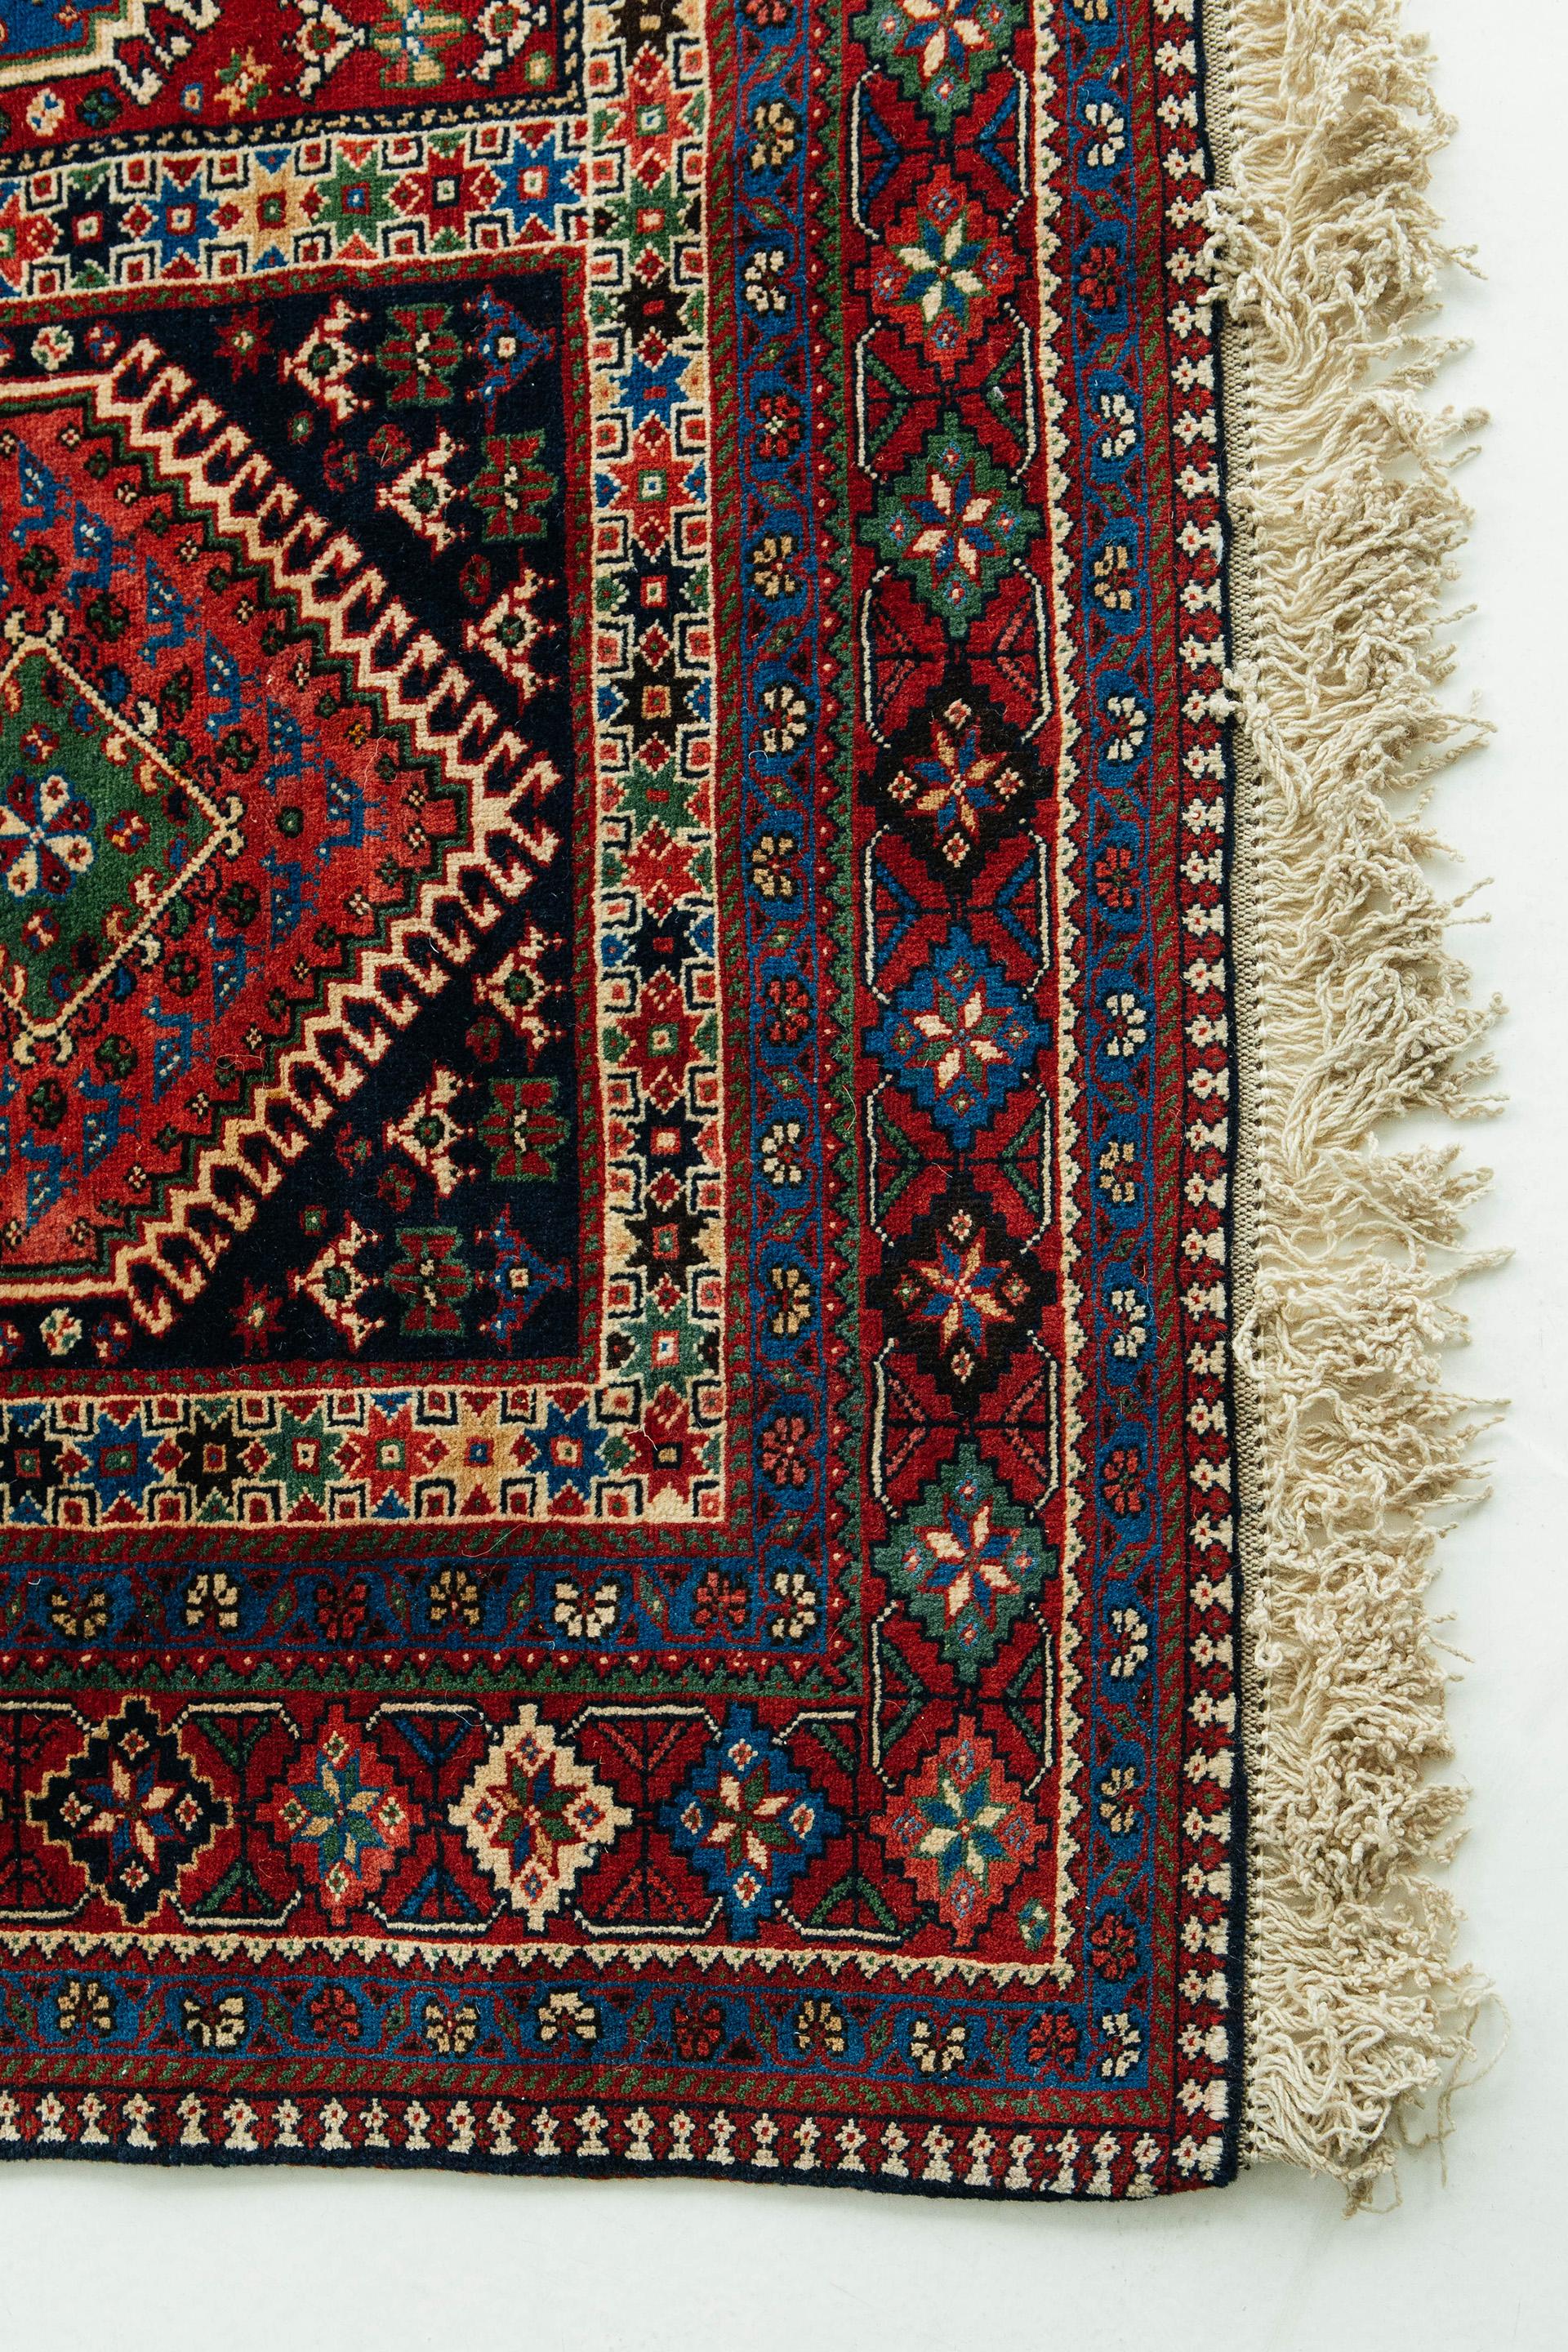 This antique Yalameh rug in deep red, blue, green, black, and ivory tones. The field pattern consists of rectangular compartments with latch-hook diamond medallions and varied fill motifs, including stars and talismans. The main border features